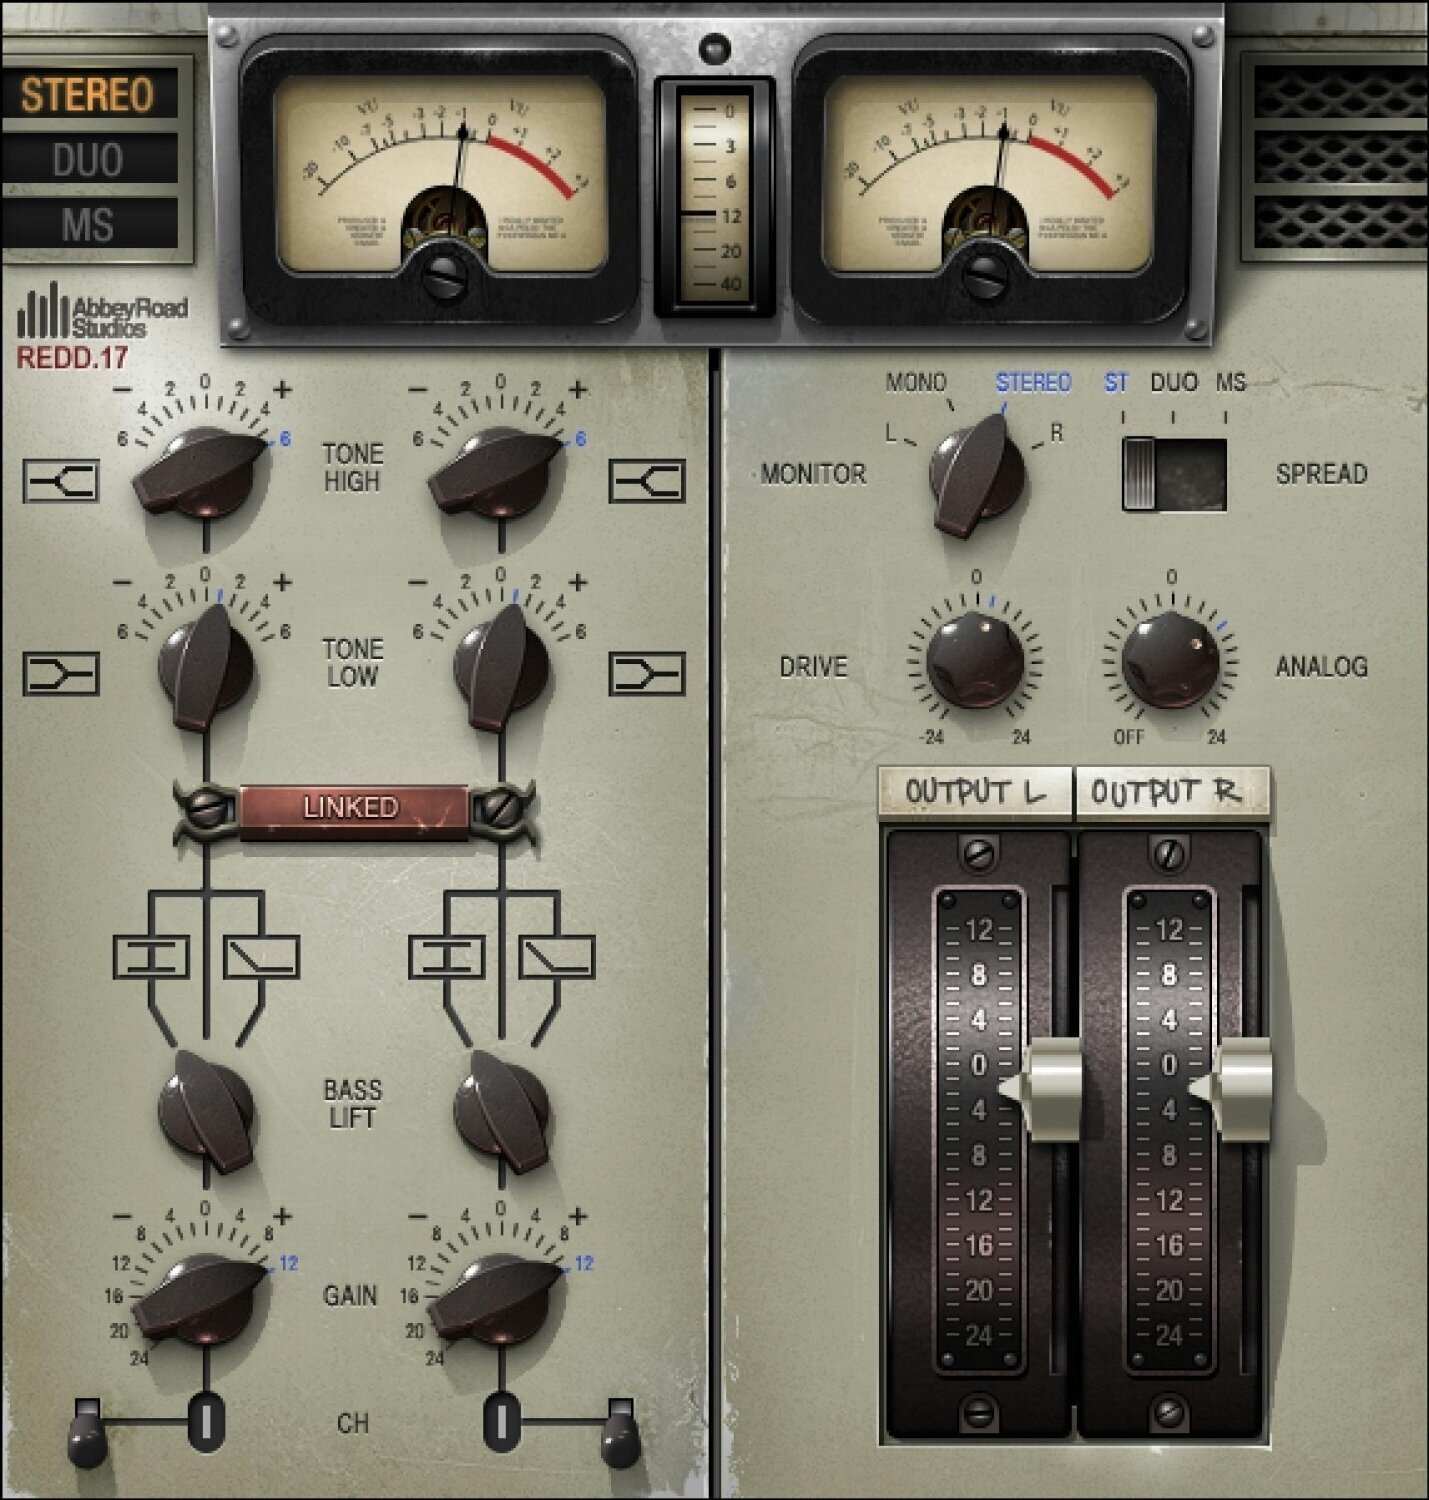 Studio software plug-in effect Waves Abbey Road REDD Consoles (Digitaal product)